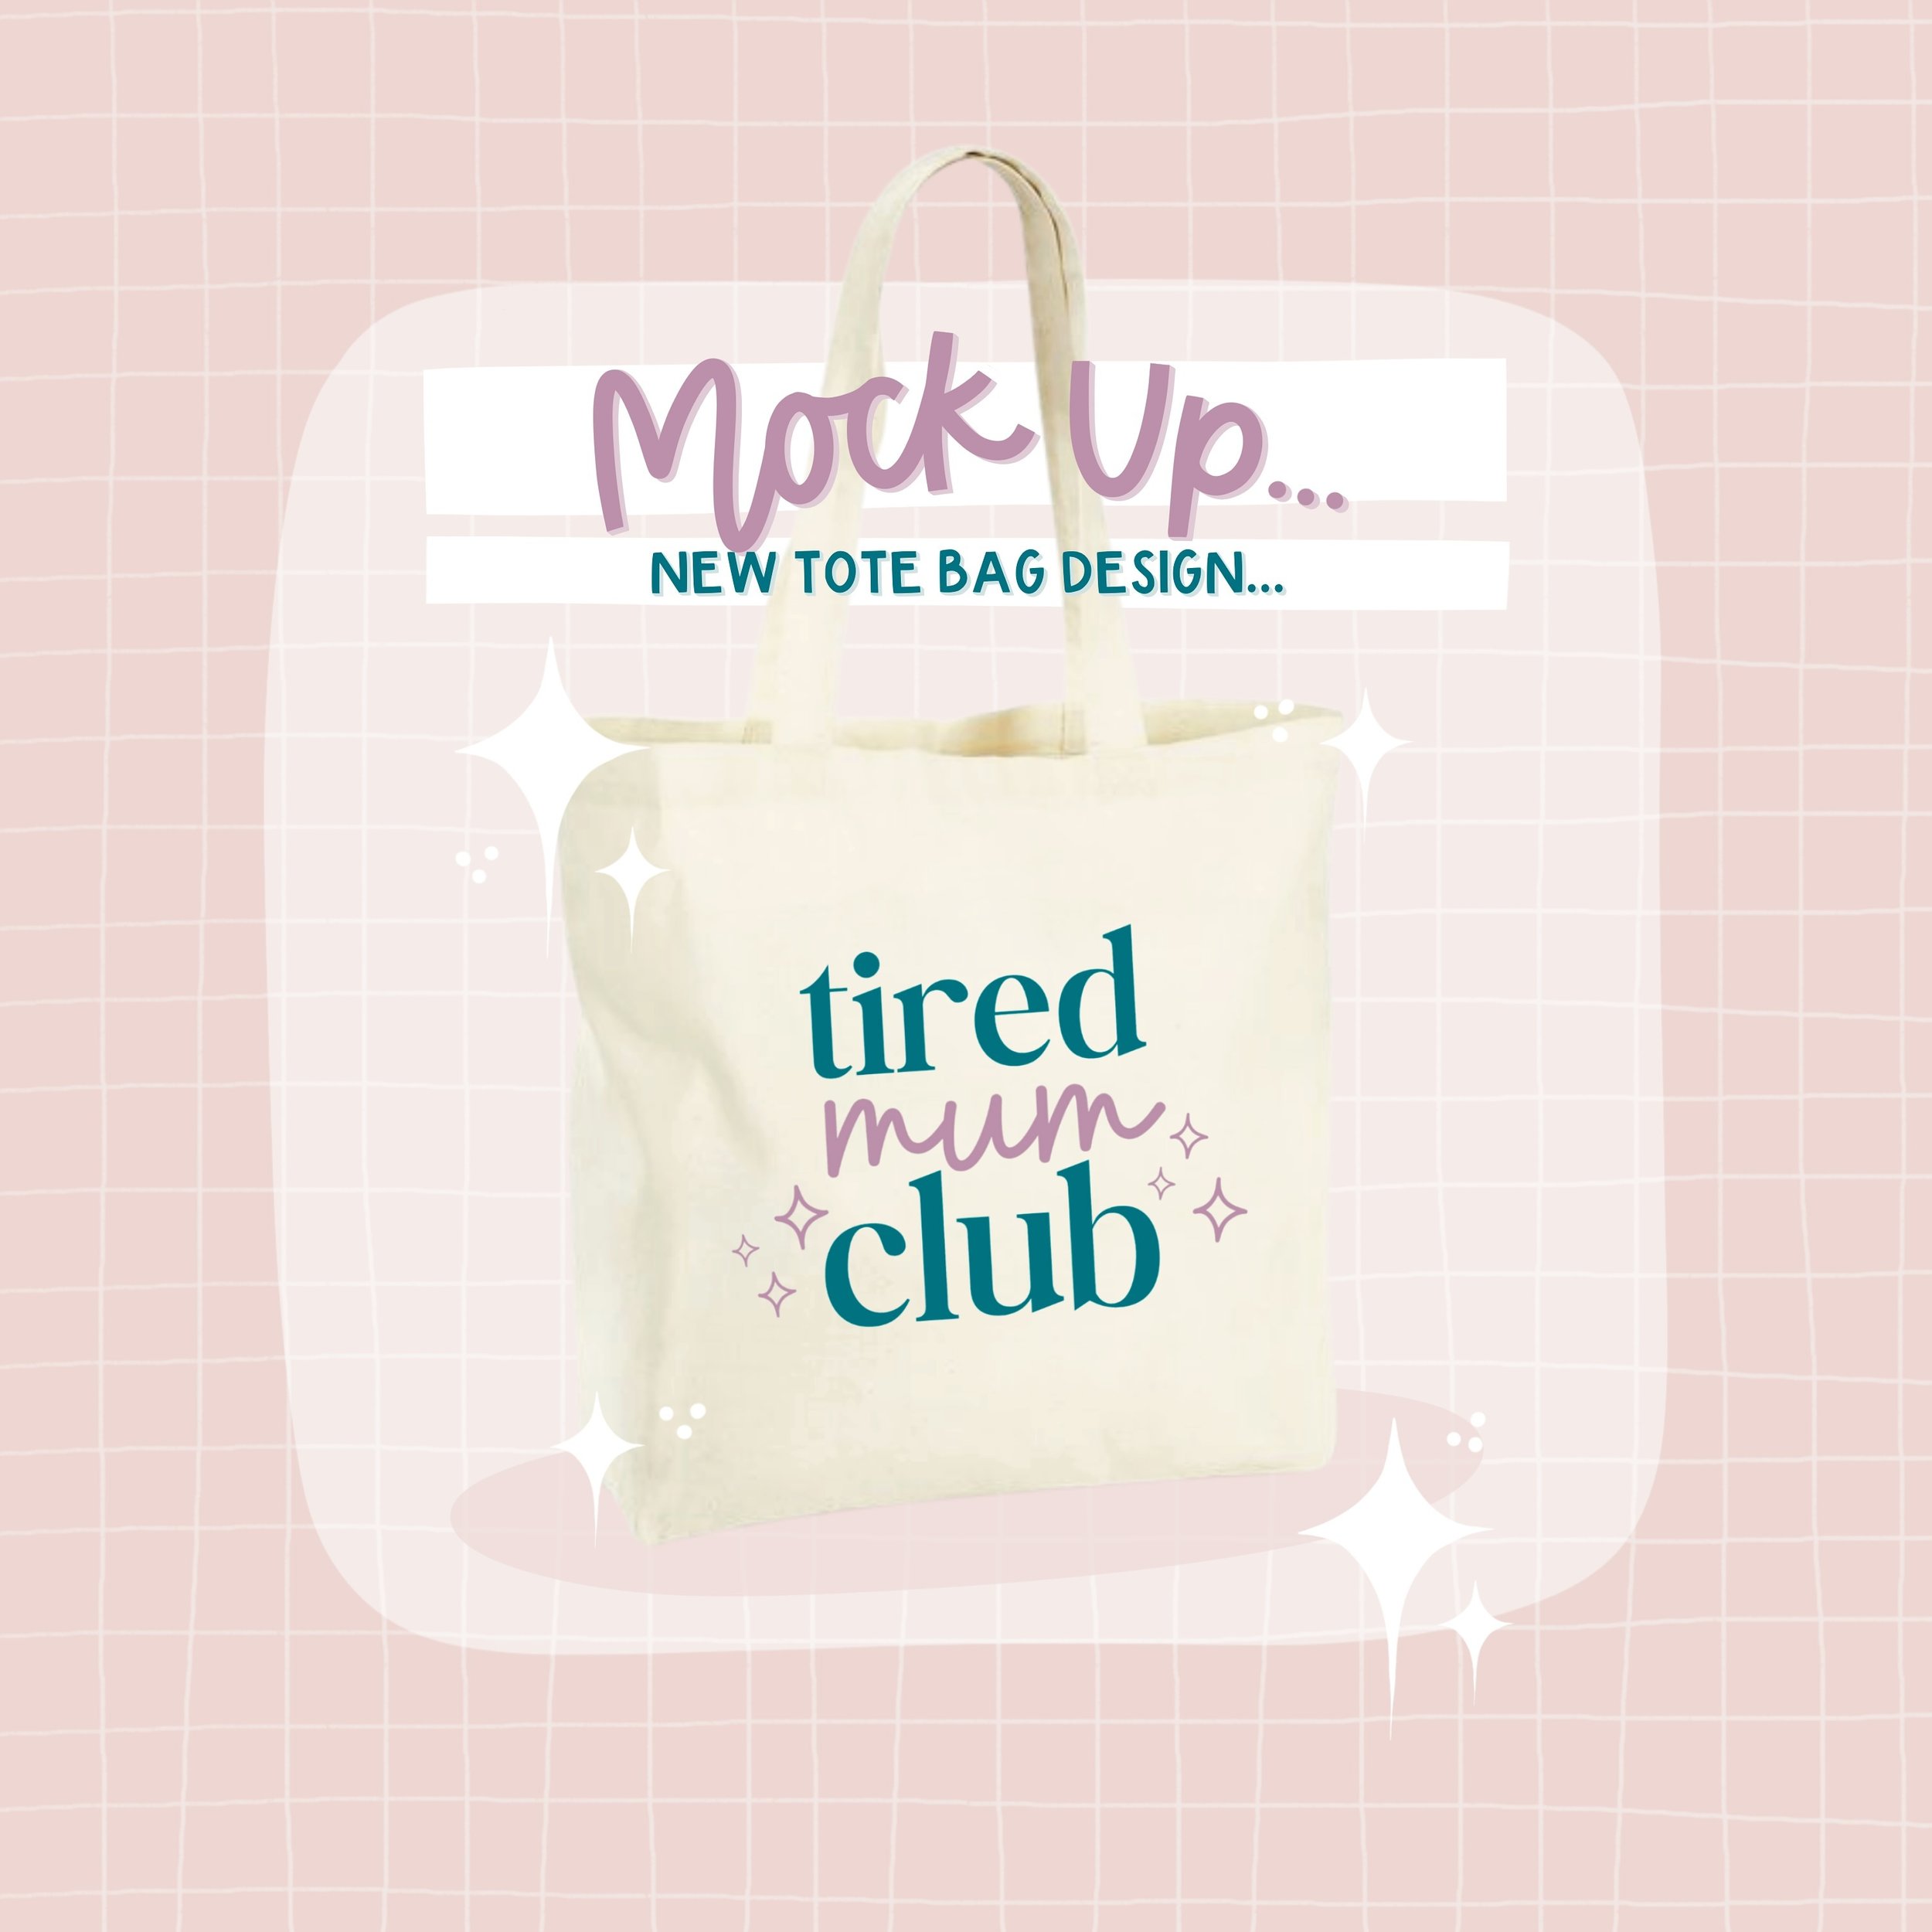 ✨ Tired Mum Club Tote Bags ✨

Over the past few months I have been trying to think of my next new tote bag. I wanted a bigger, brighter and bolder bag that could be used everyday&hellip; and this is what I&rsquo;ve come up with!

These bags will be 1